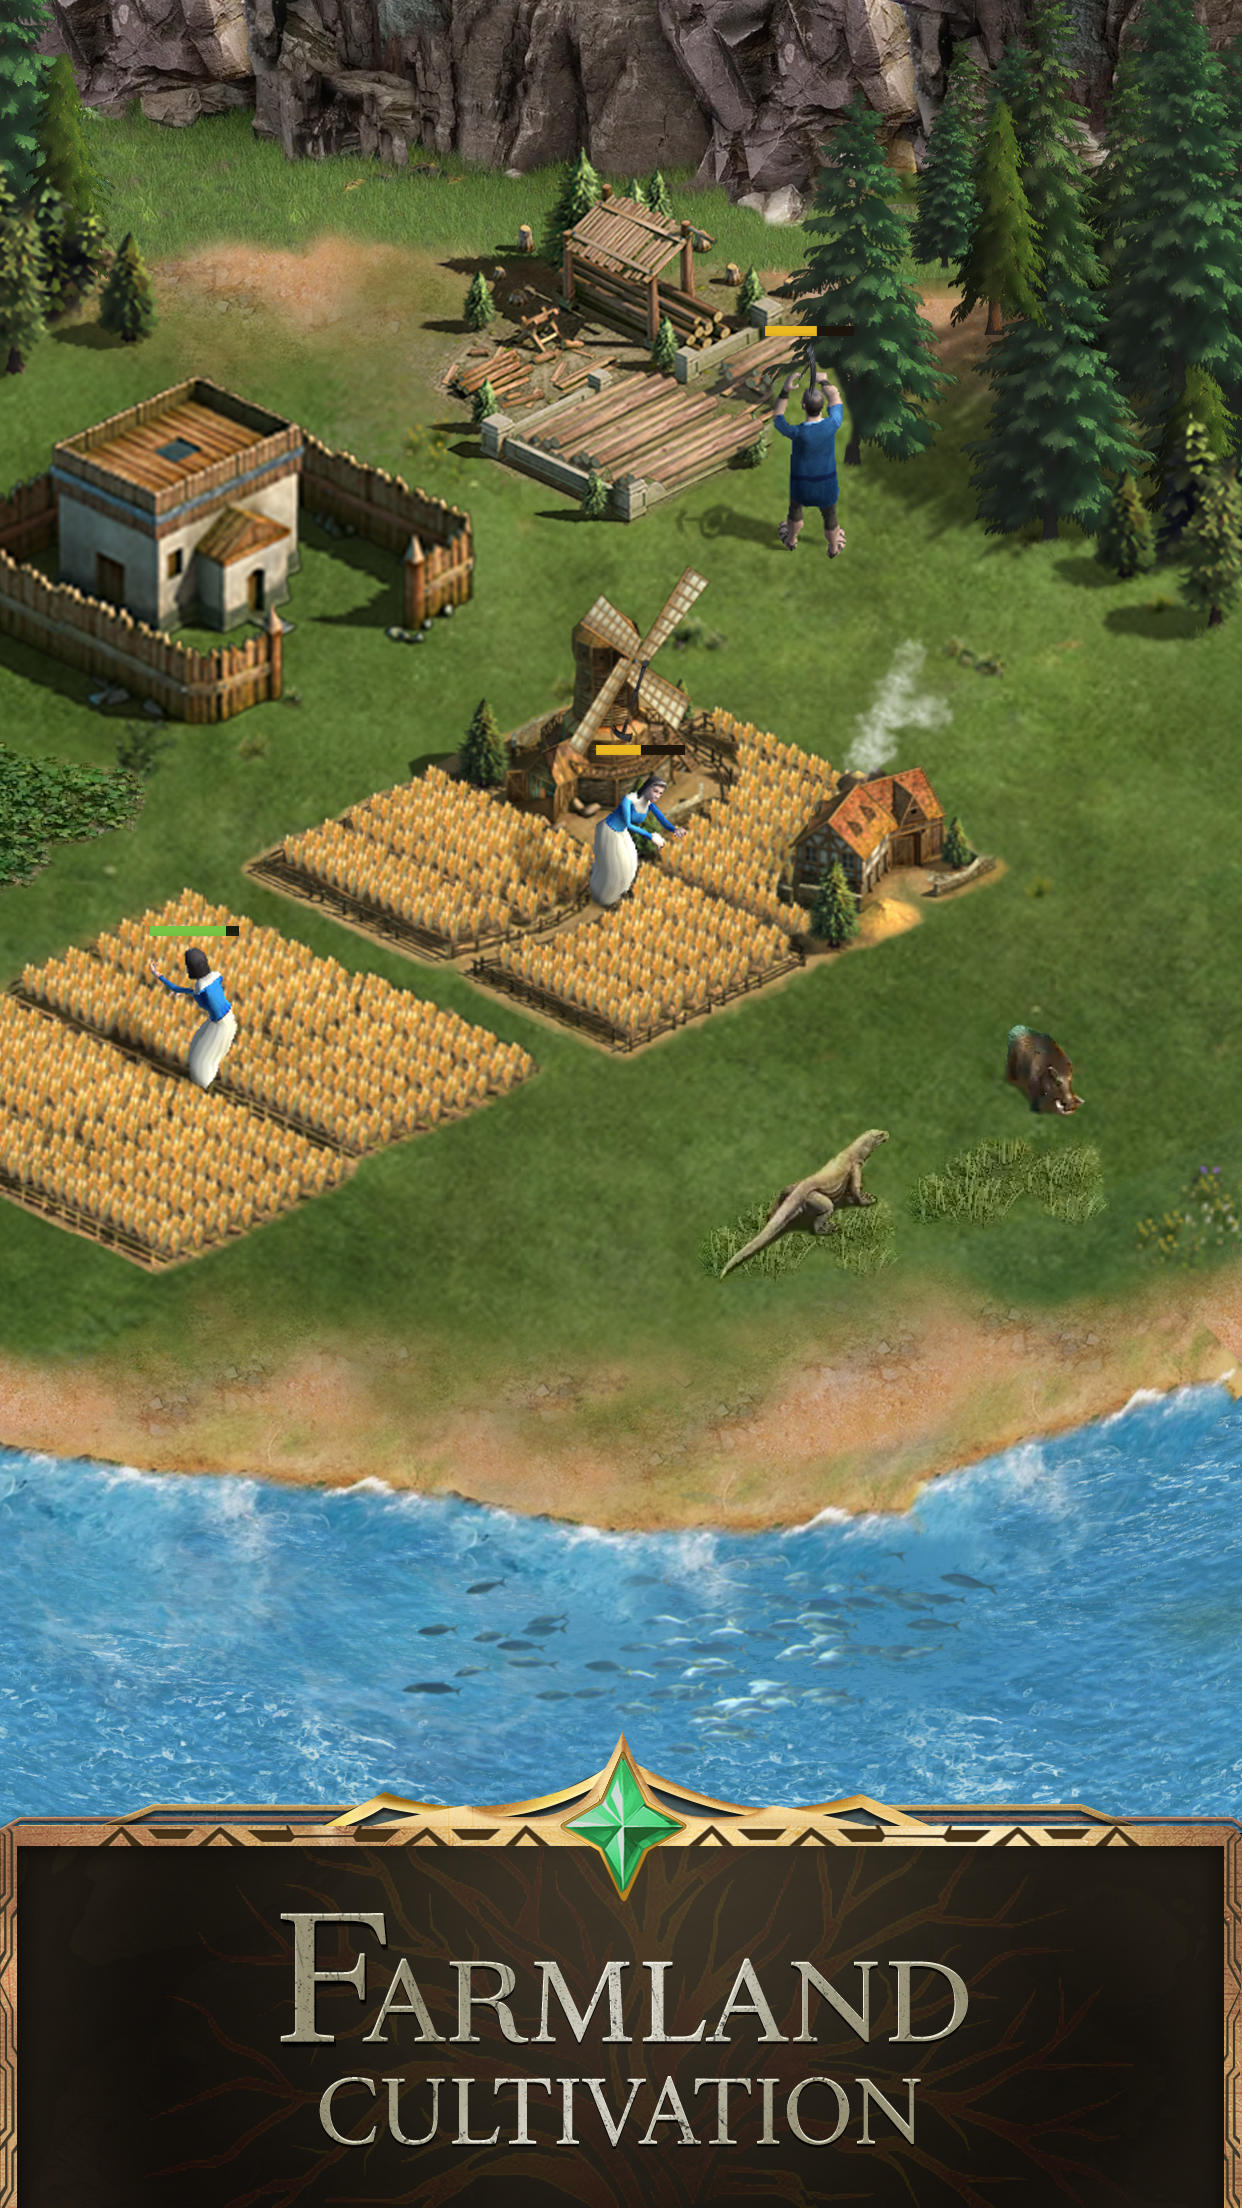 King's Empire::Appstore for Android